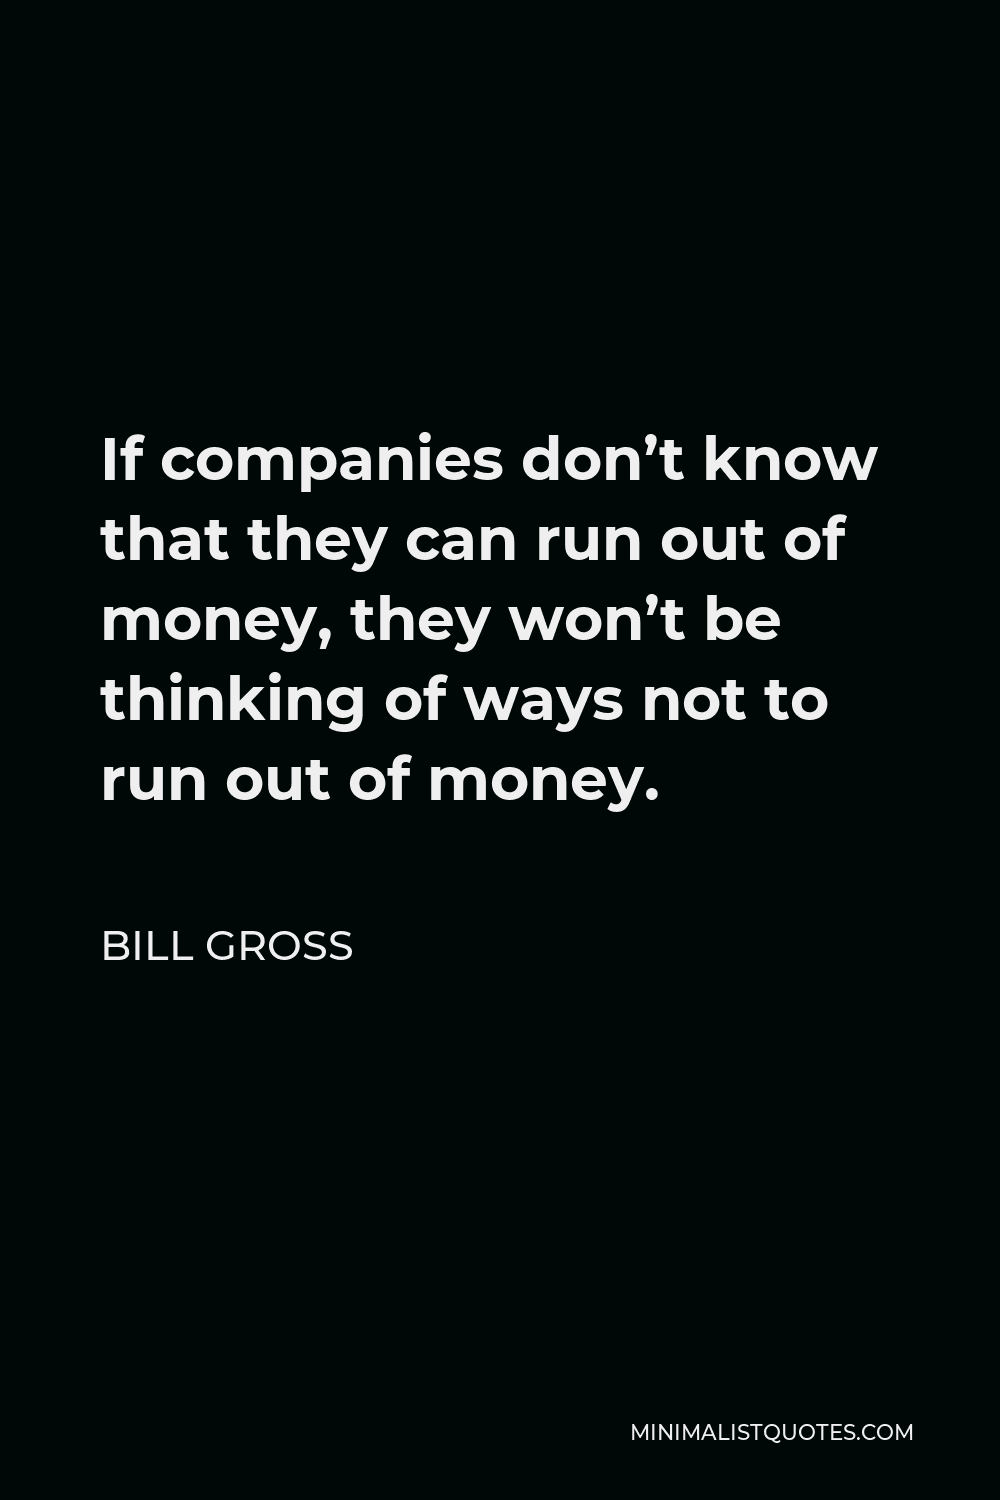 Bill Gross Quote - If companies don’t know that they can run out of money, they won’t be thinking of ways not to run out of money.